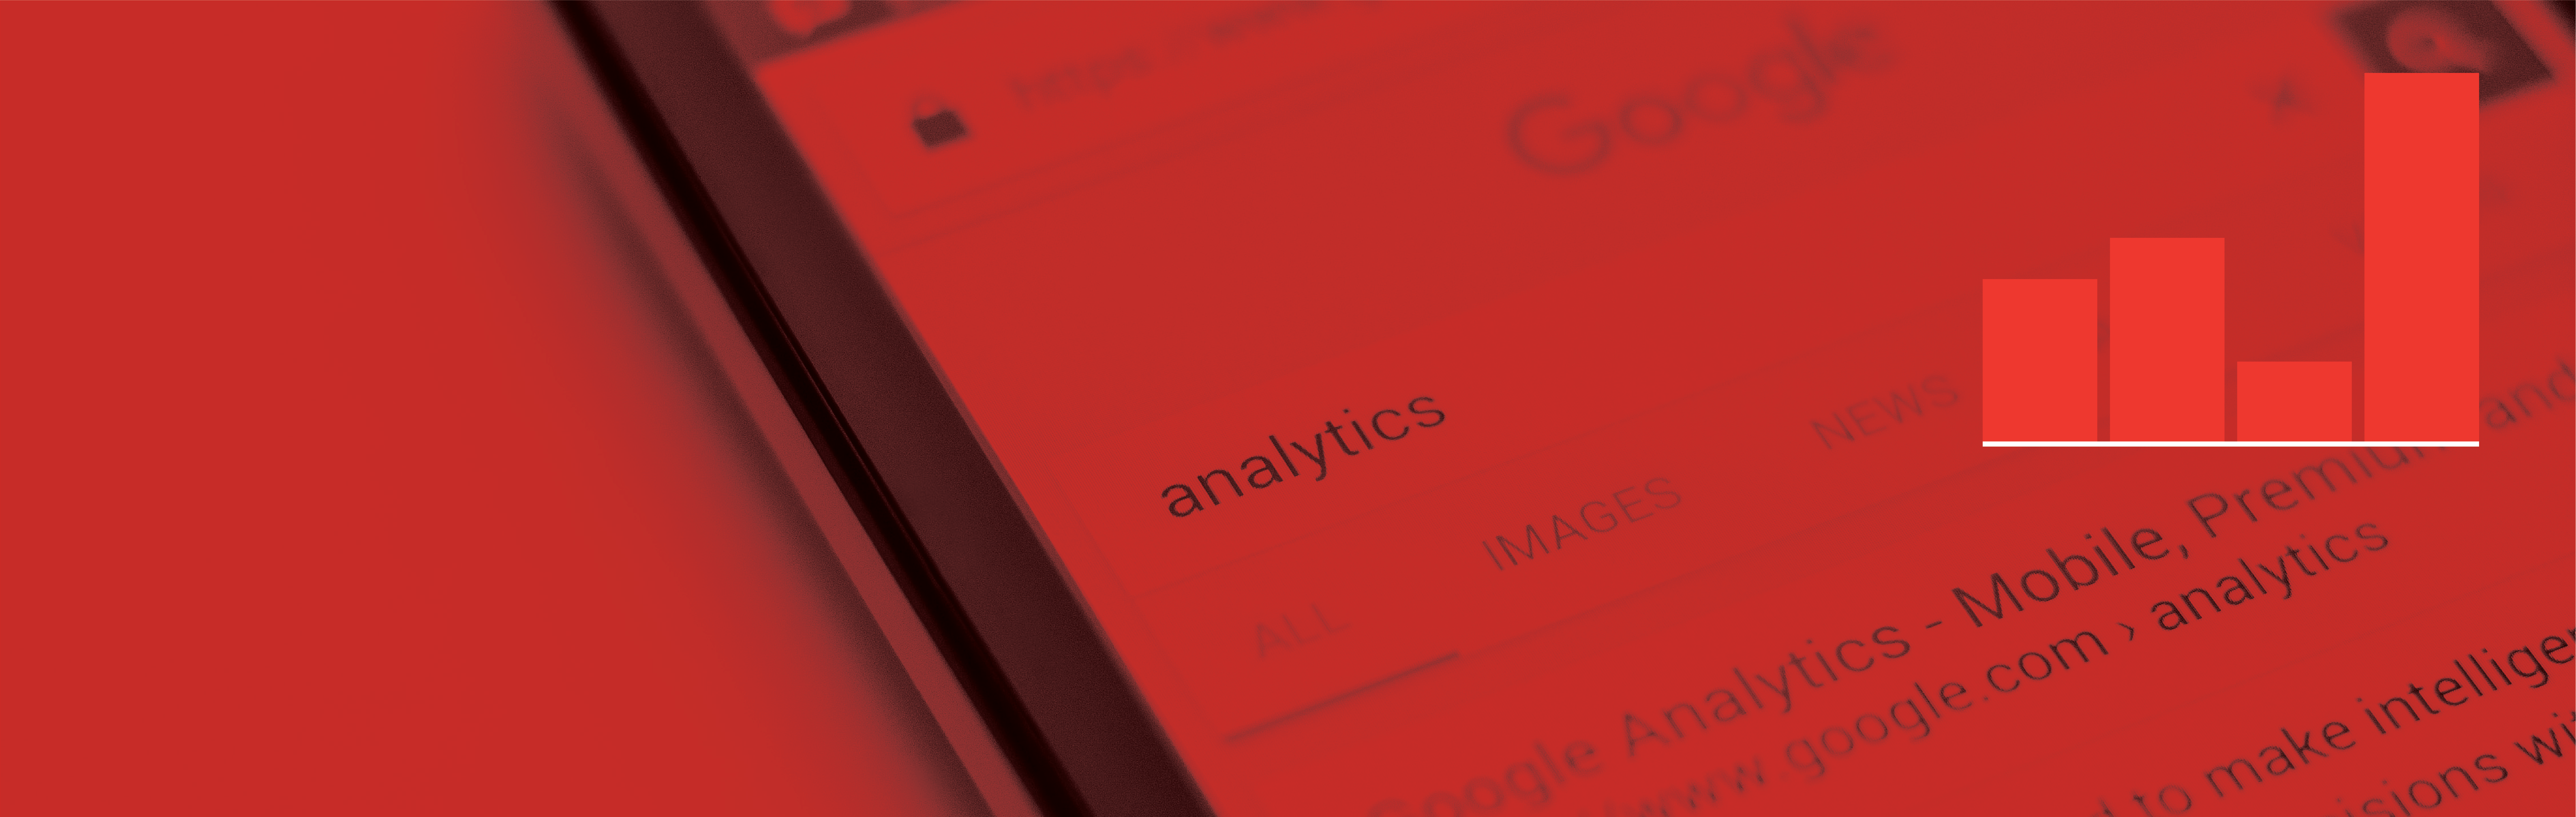 Demystifying Google Analytics: How To Build and Use Segments